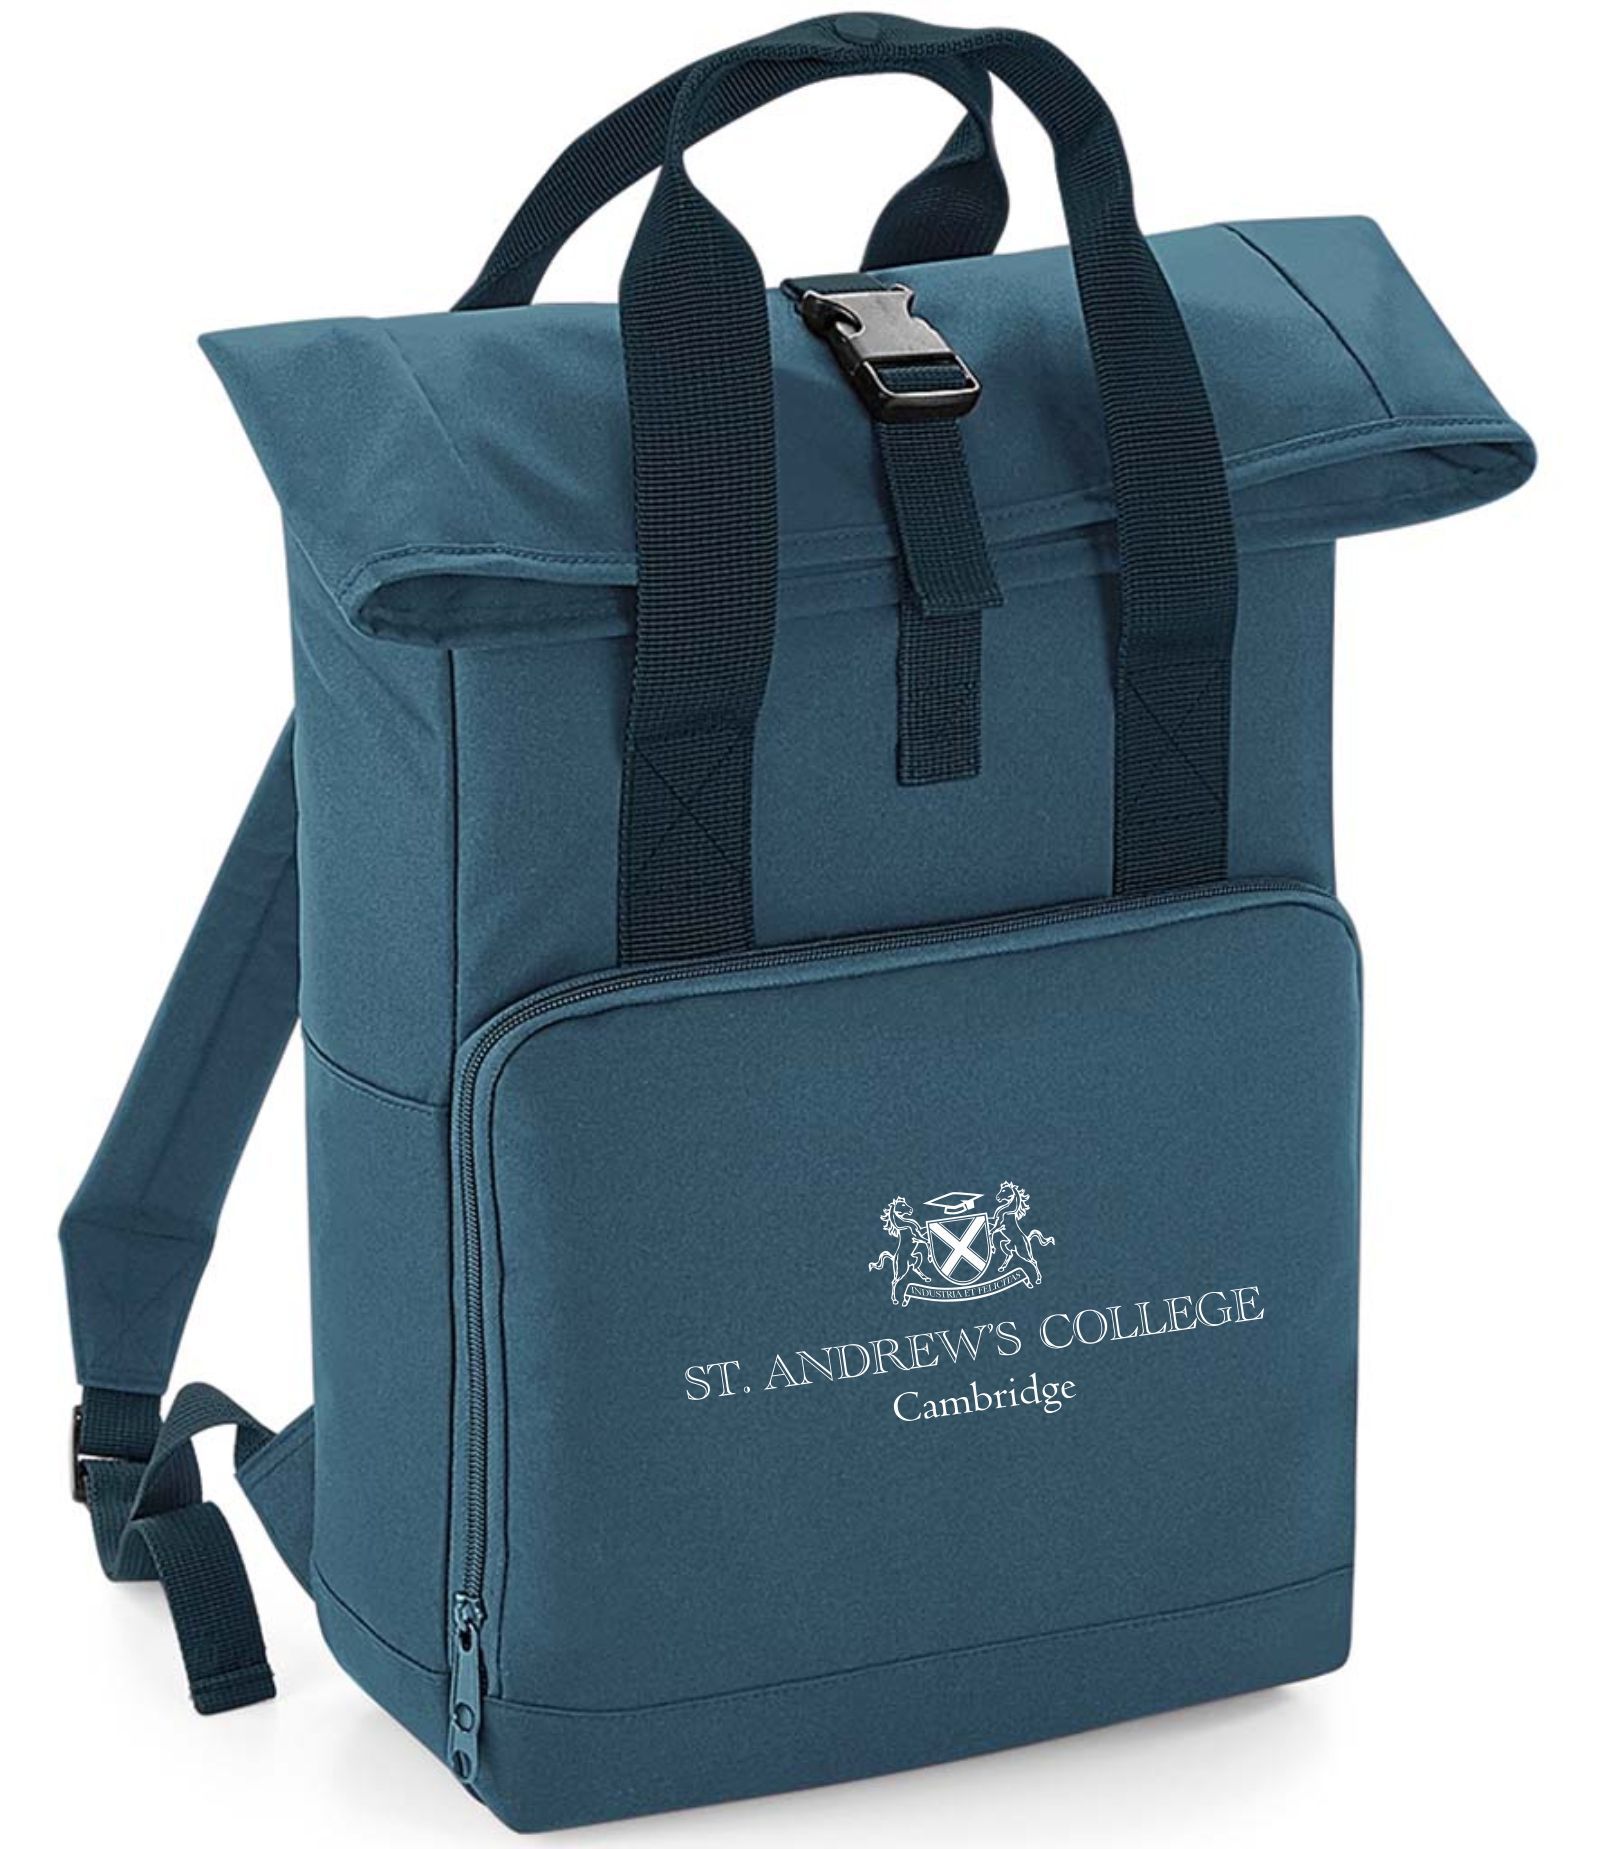 St Andrew's College Cambridge - Backpack